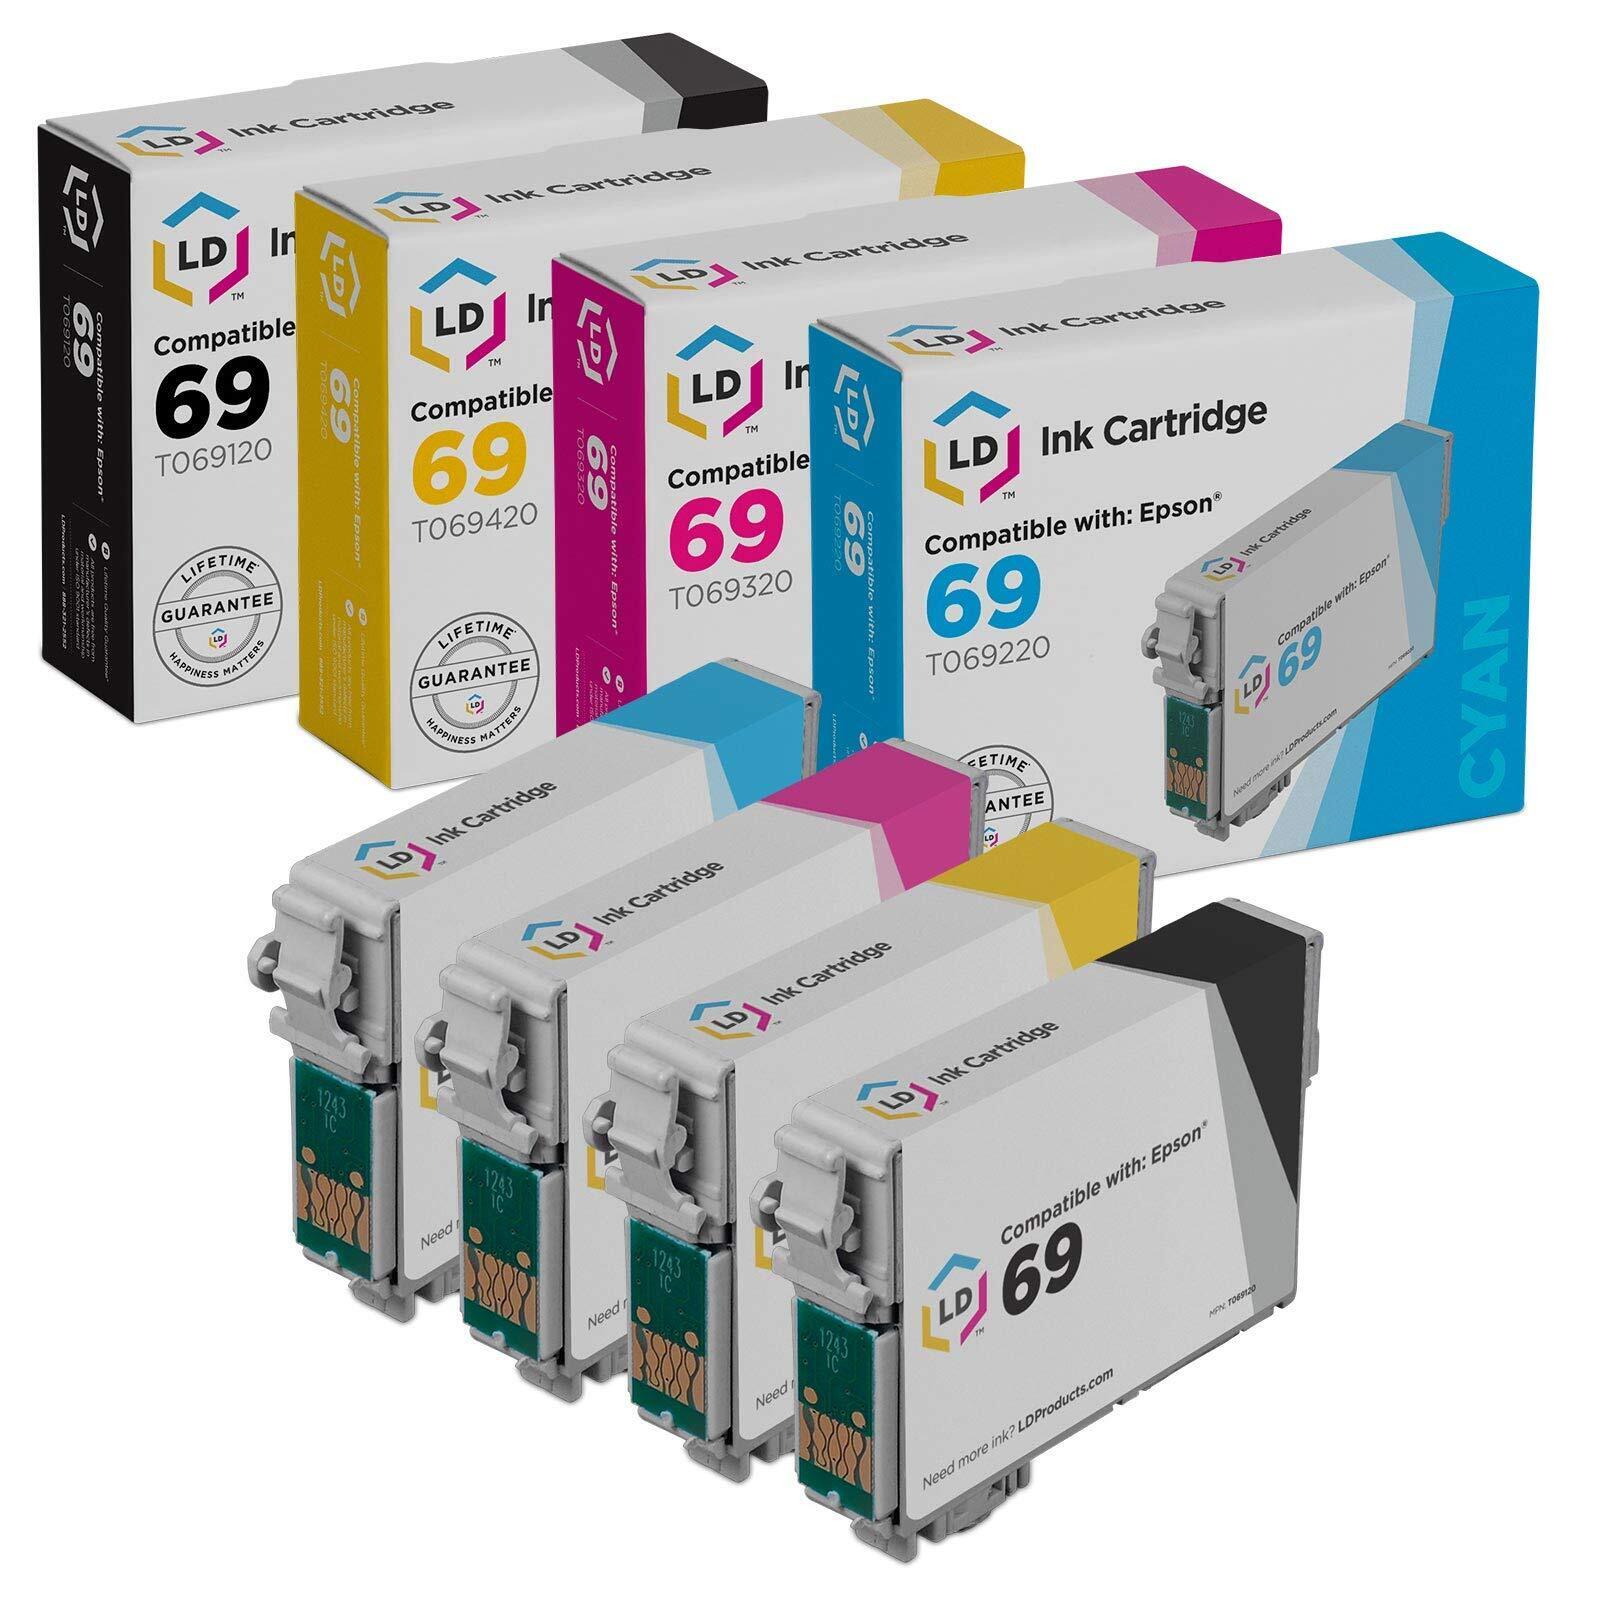 LD Reman Ink Cartridge for Epson T069 Set of 4: T069120 T069220 T069320 T069420